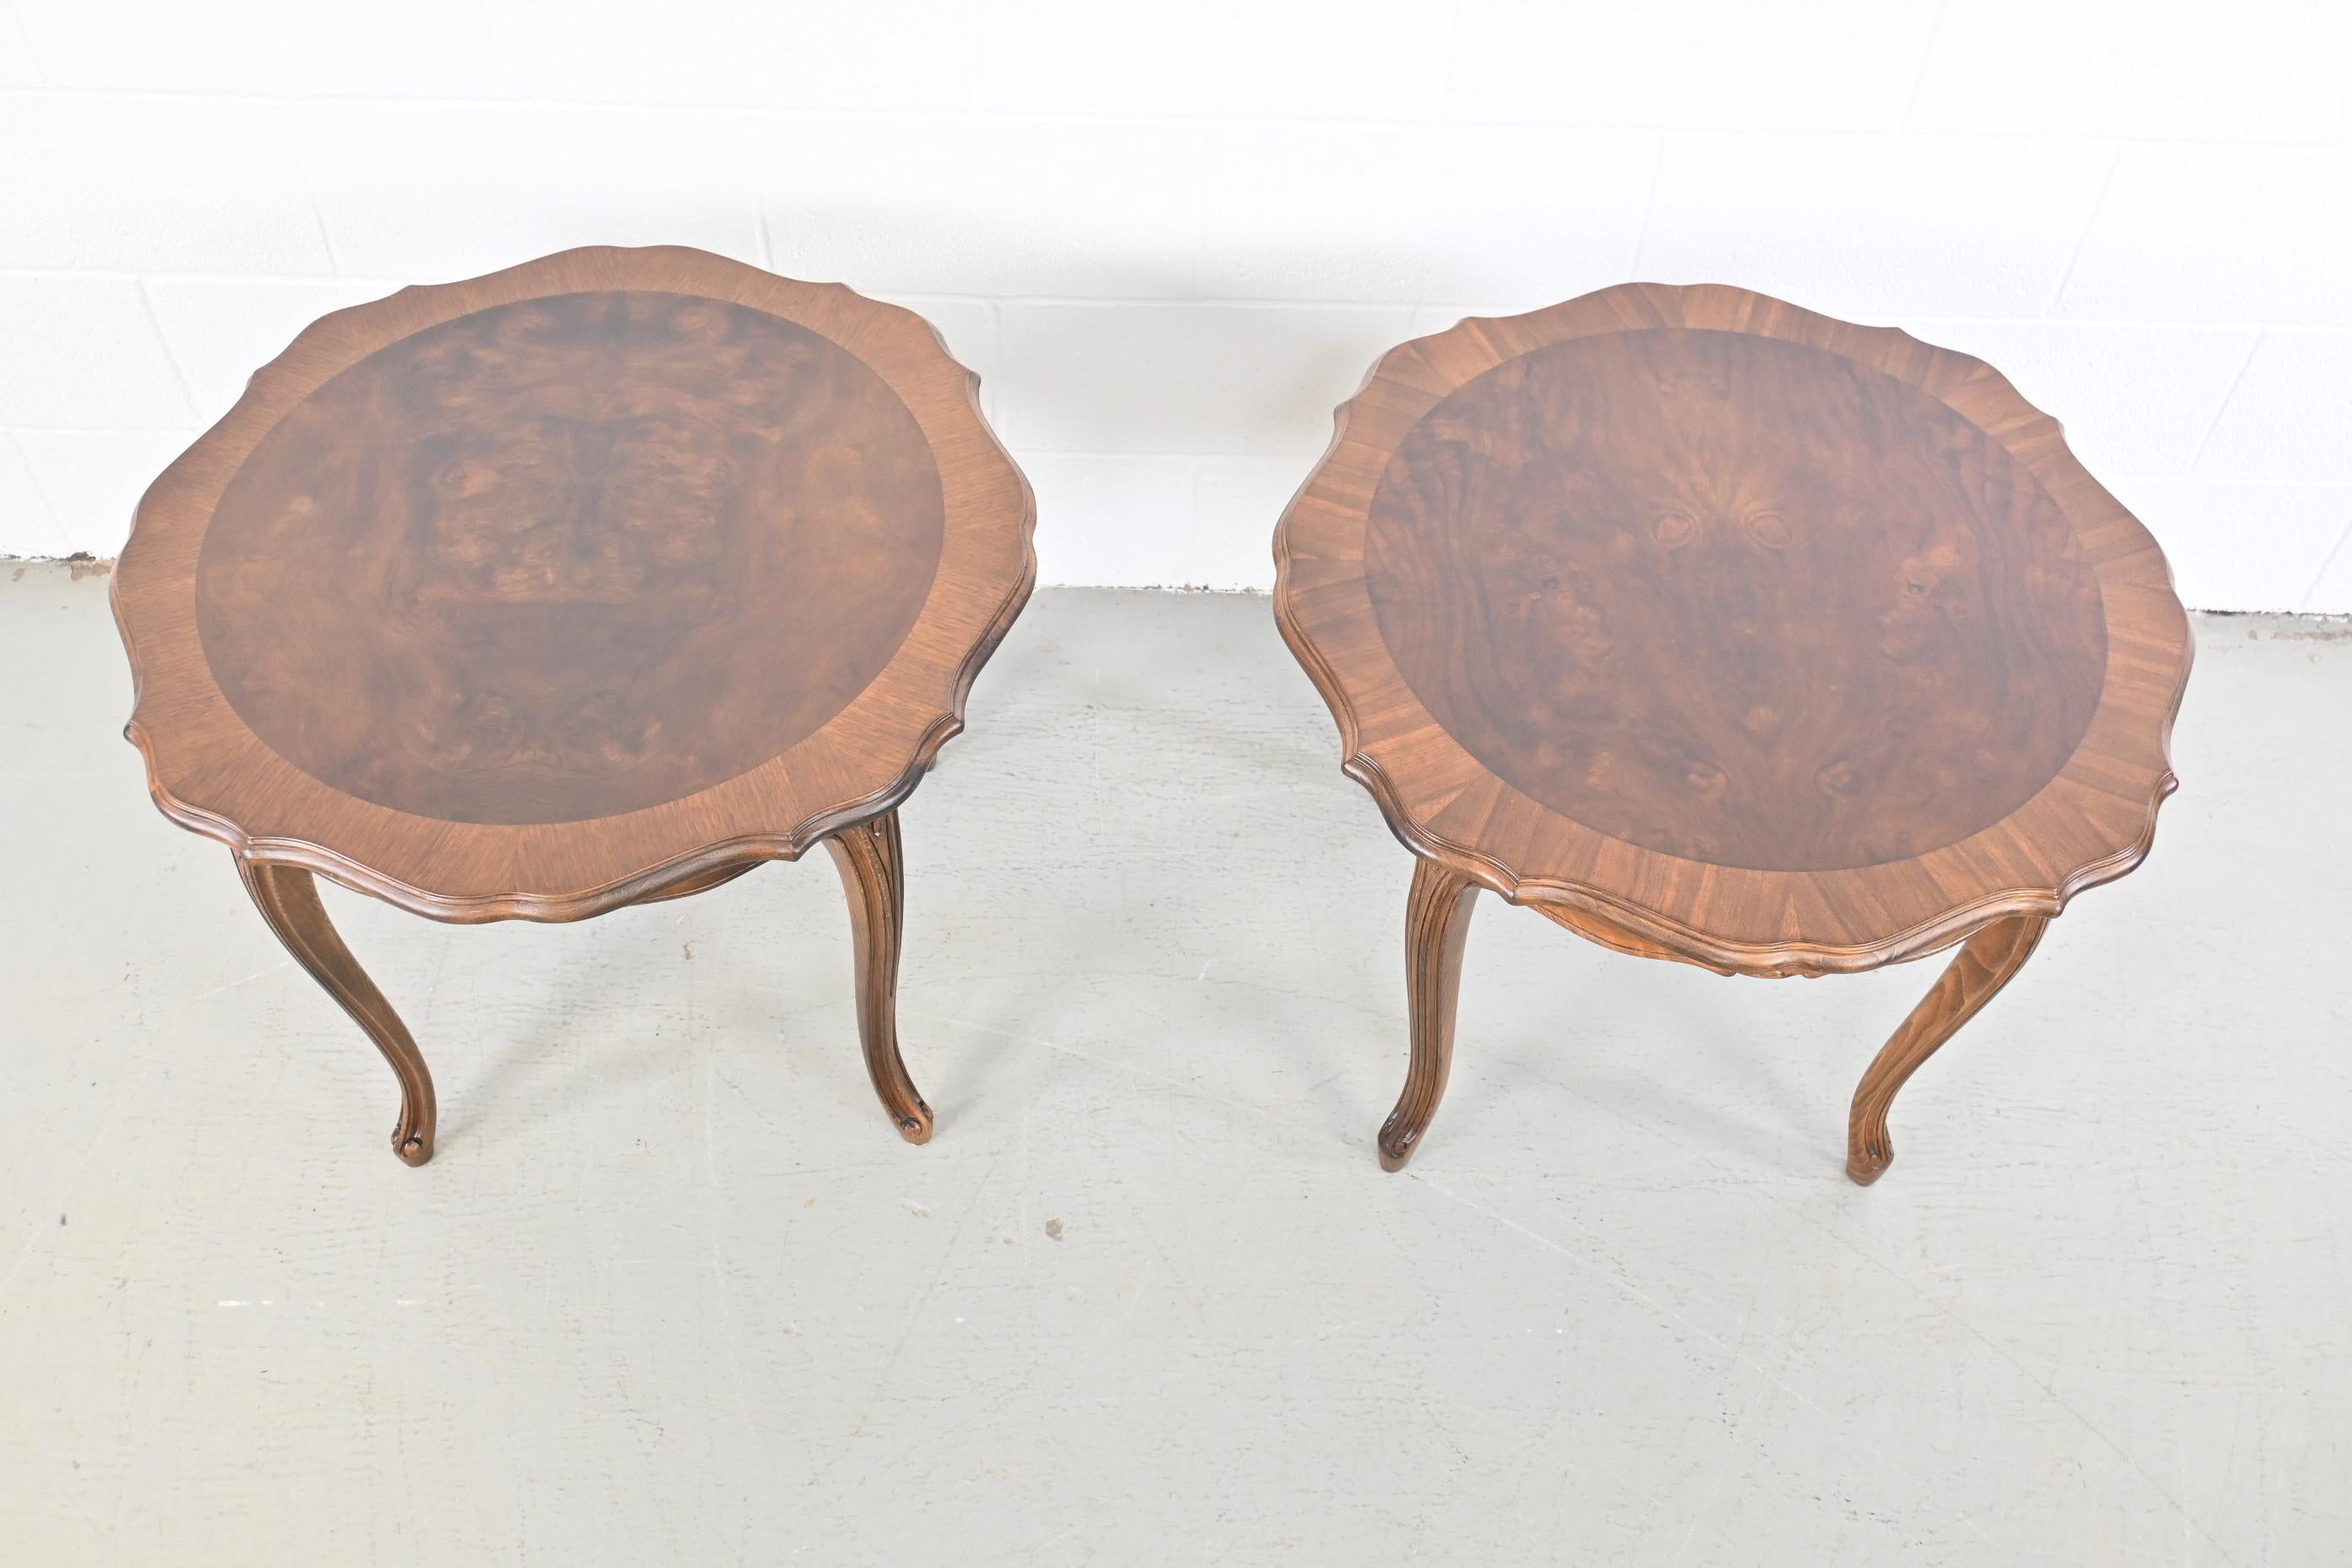 Karges Furniture French Provincial Burled Walnut End Tables, a Pair In Excellent Condition For Sale In Morgan, UT